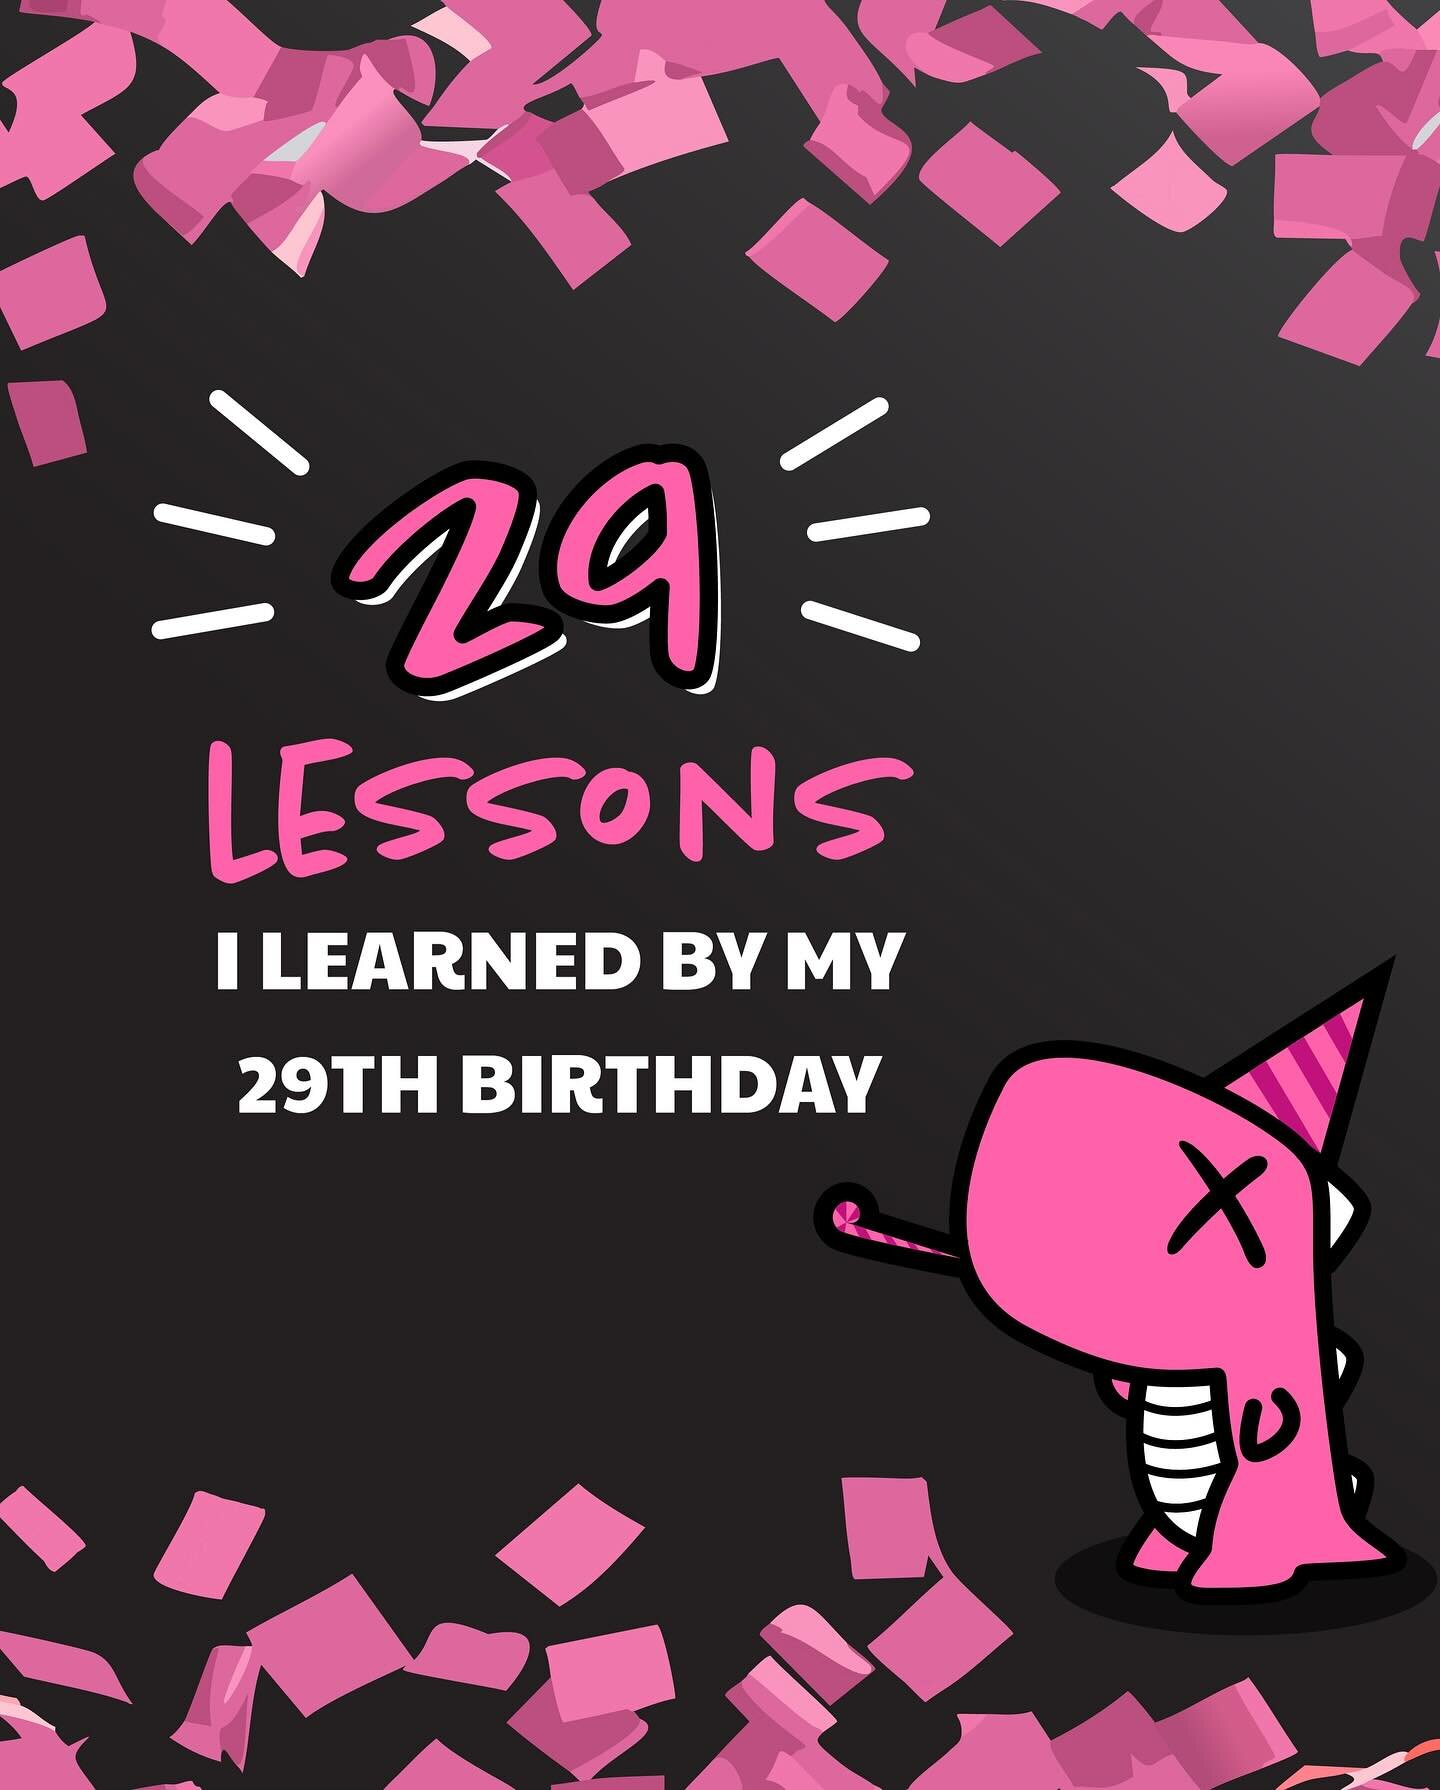 So I turned 29 last week&hellip; and here&rsquo;s what I&rsquo;ve been reflecting on 👀

What&rsquo;s your biggest takeaway from this year? 😁

.
.⁣
.⁣
.⁣
.⁣
#personalbranding #birthdaygirl #reflection #hbd #lifelessons #character #personaldevelopmen